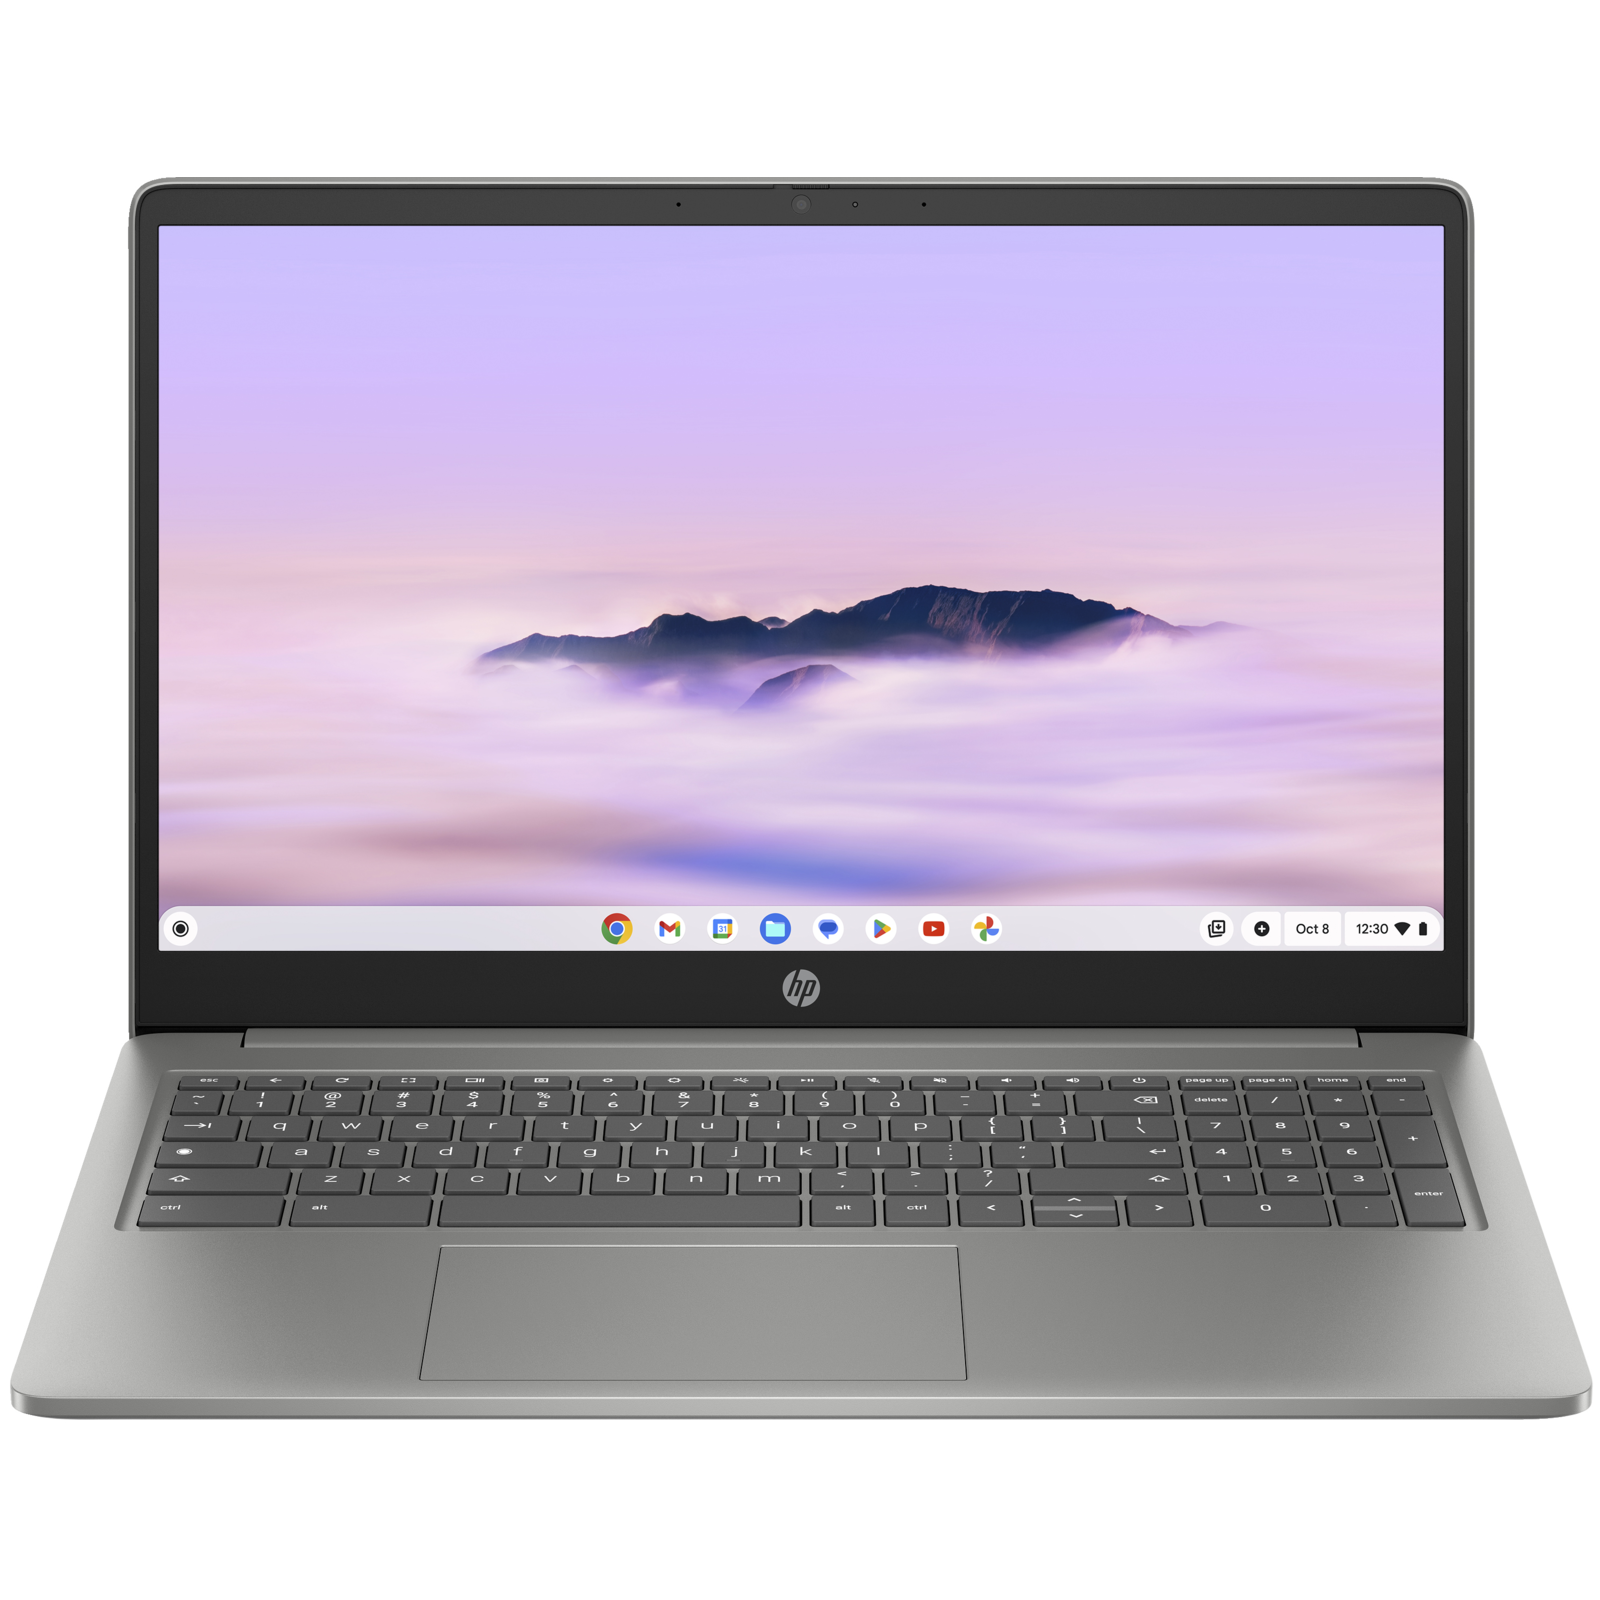 Front view of the HP Chromebook Plus 15a